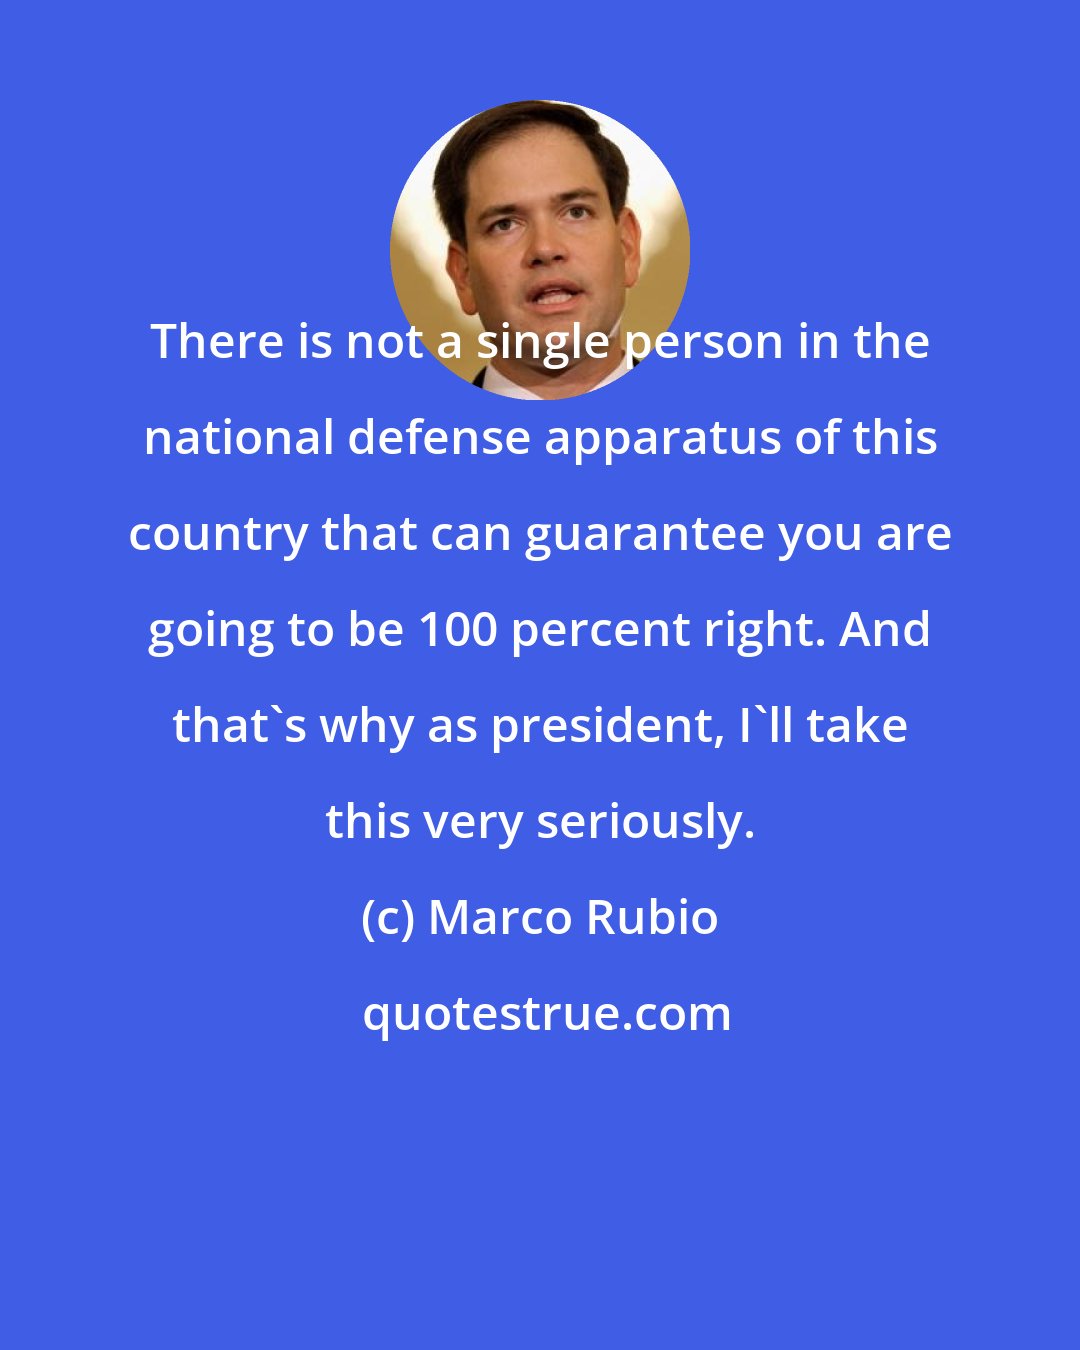 Marco Rubio: There is not a single person in the national defense apparatus of this country that can guarantee you are going to be 100 percent right. And that's why as president, I'll take this very seriously.